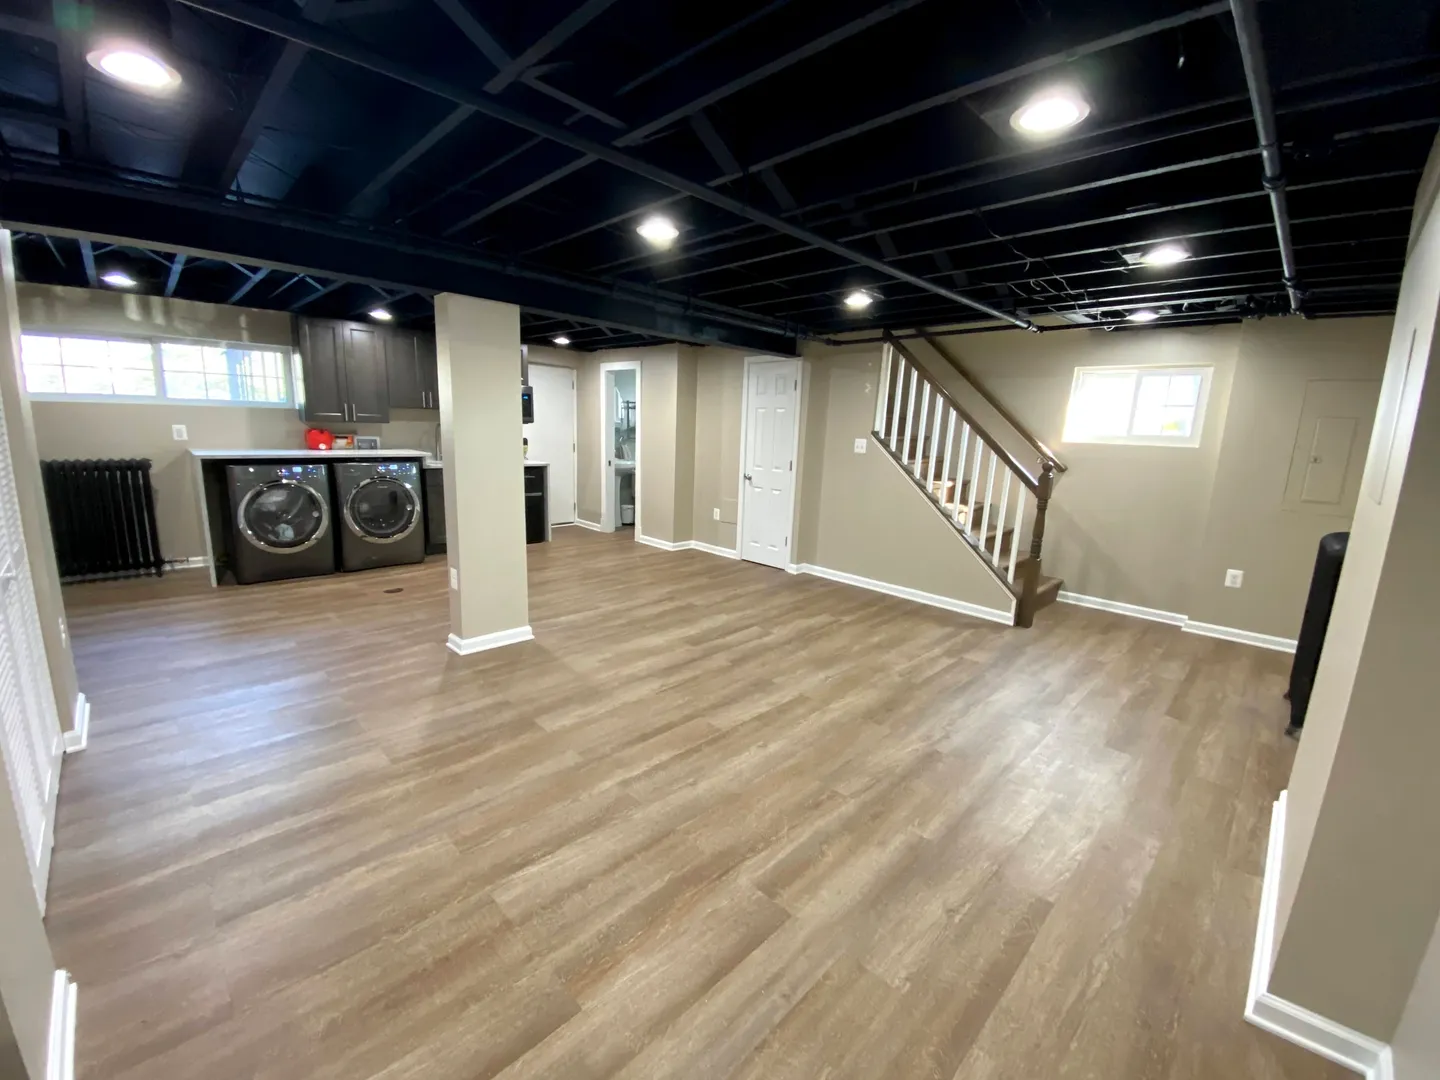 A room with wooden floors and black ceiling.